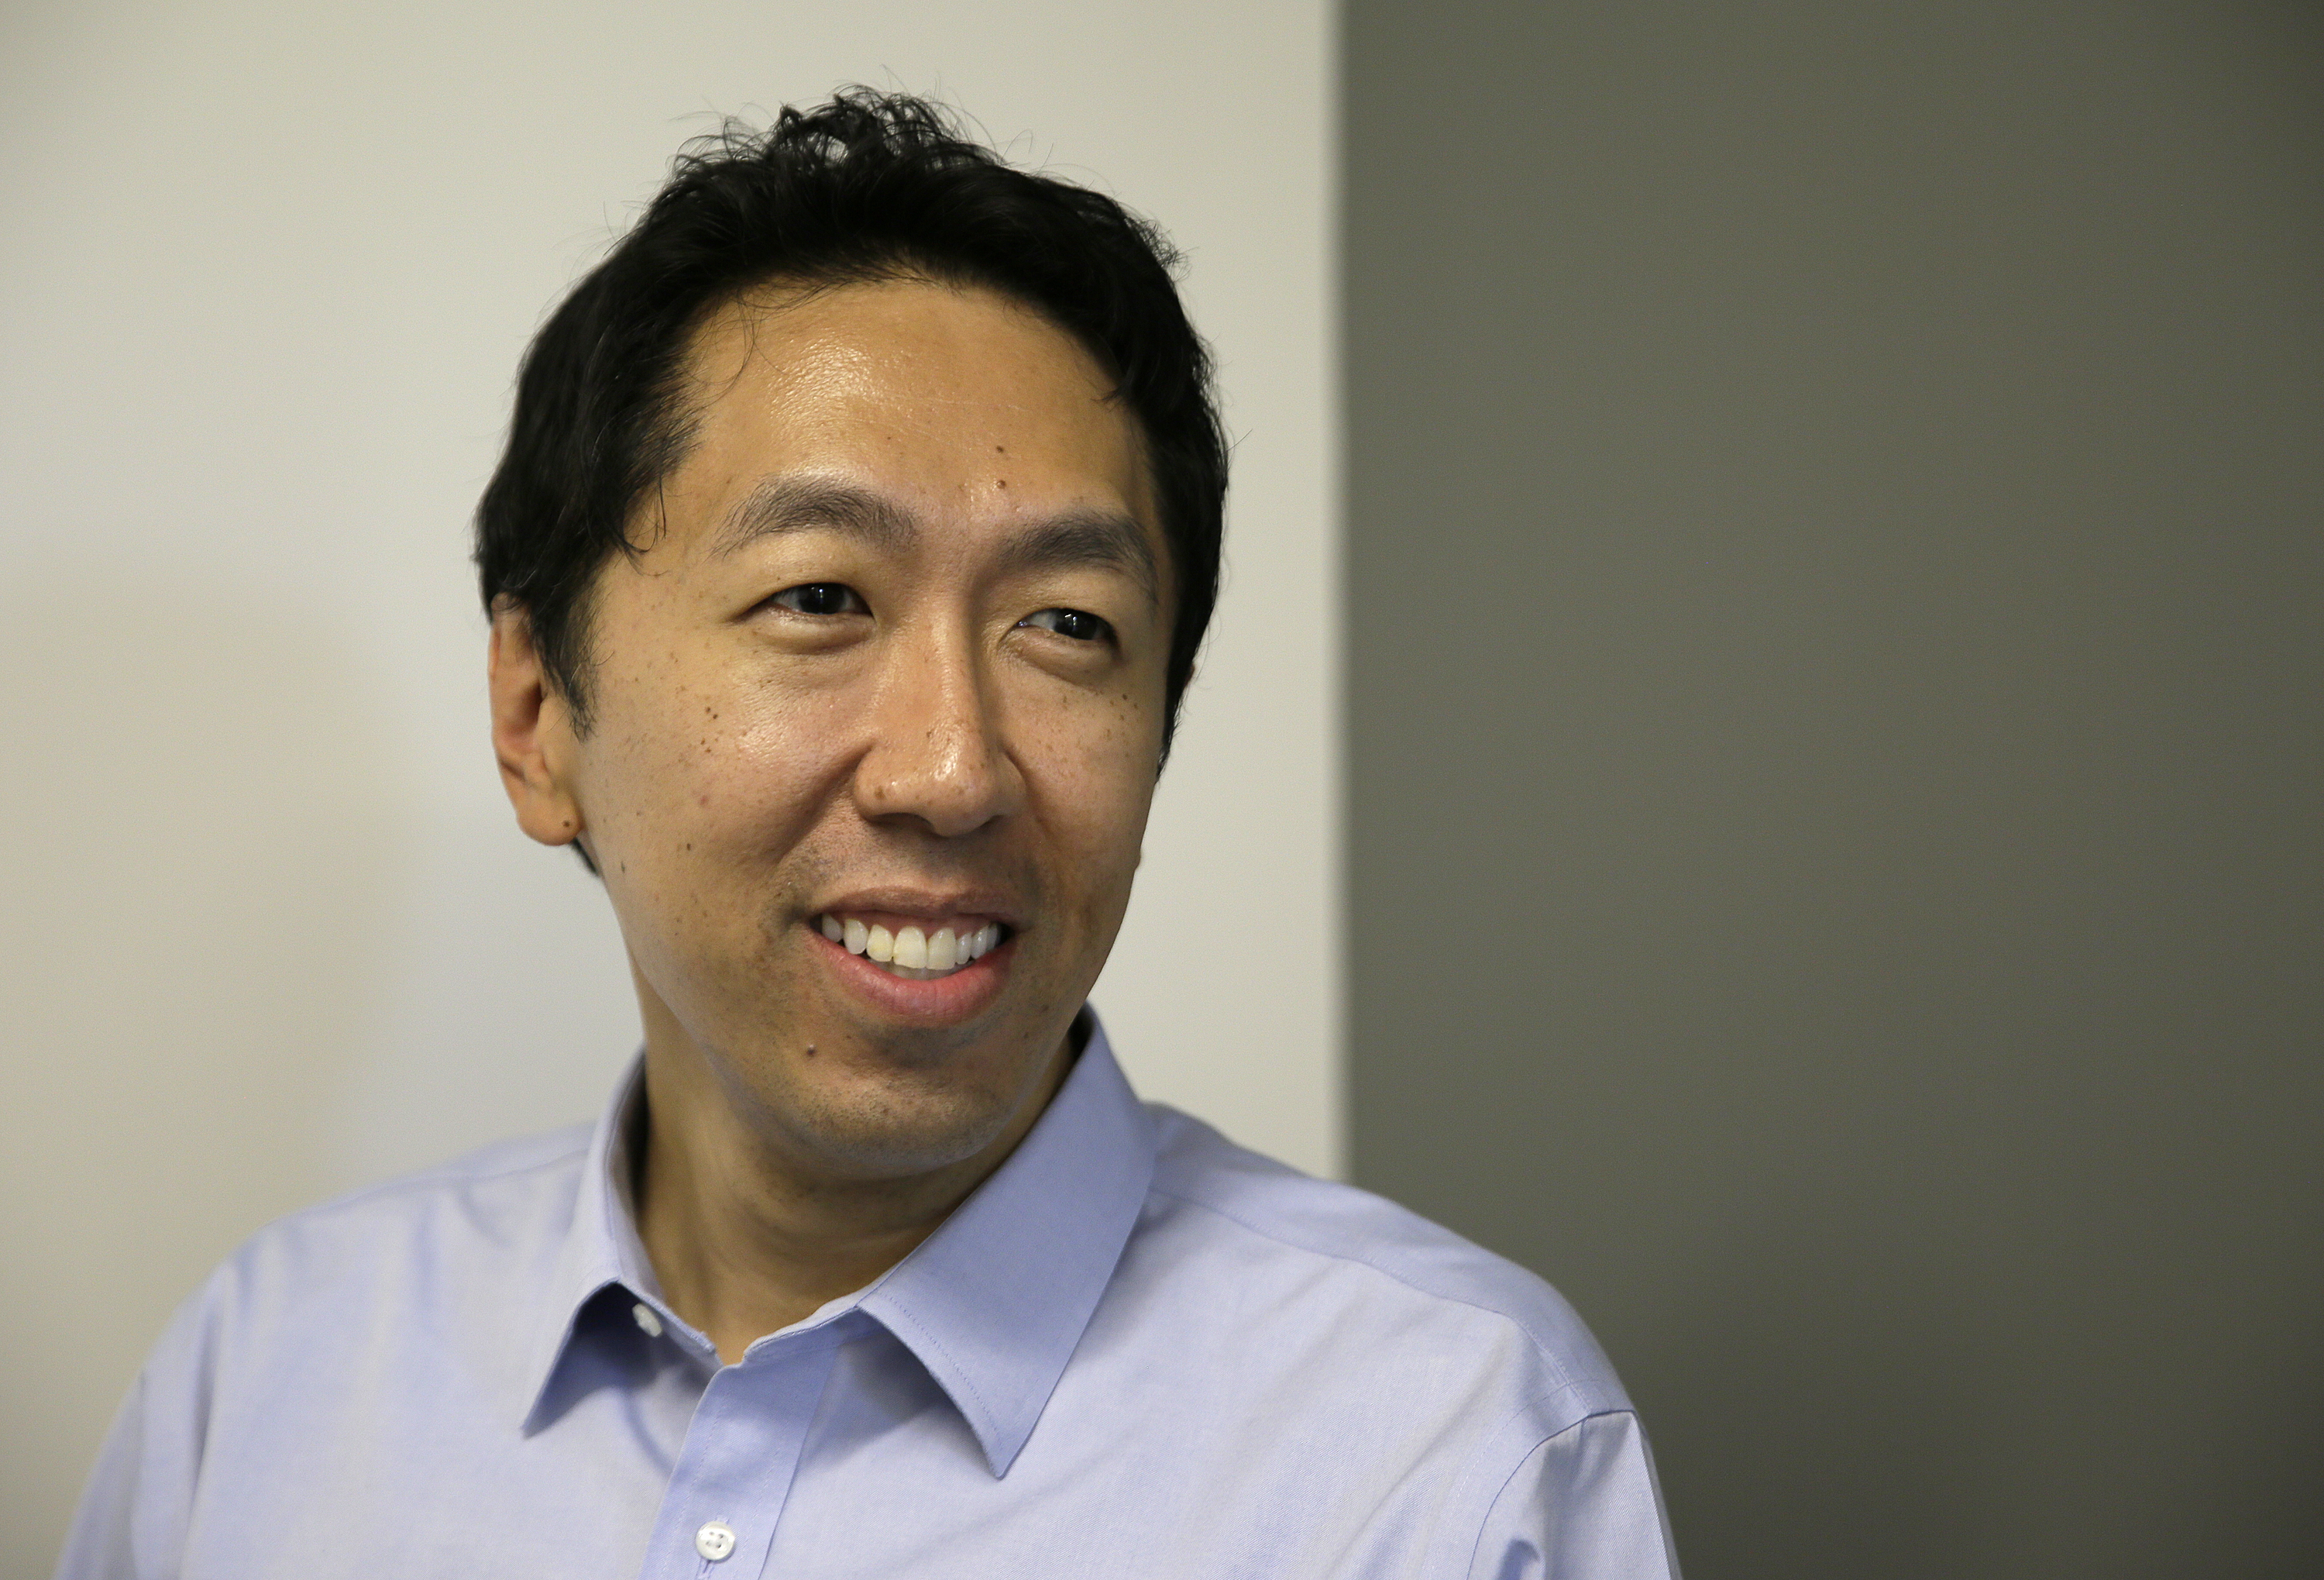 FILE - In this Friday, July 14, 2017, file photo, computer scientist Andrew Ng poses at his office in Palo Alto, Calif. Amazon announced Thursday, April 11, 2024, that it added artificial intelligence visionary Andrew Ng to its board of directors amid intense AI competition among startups and big technology companies. (AP Photo/Eric Risberg, File)